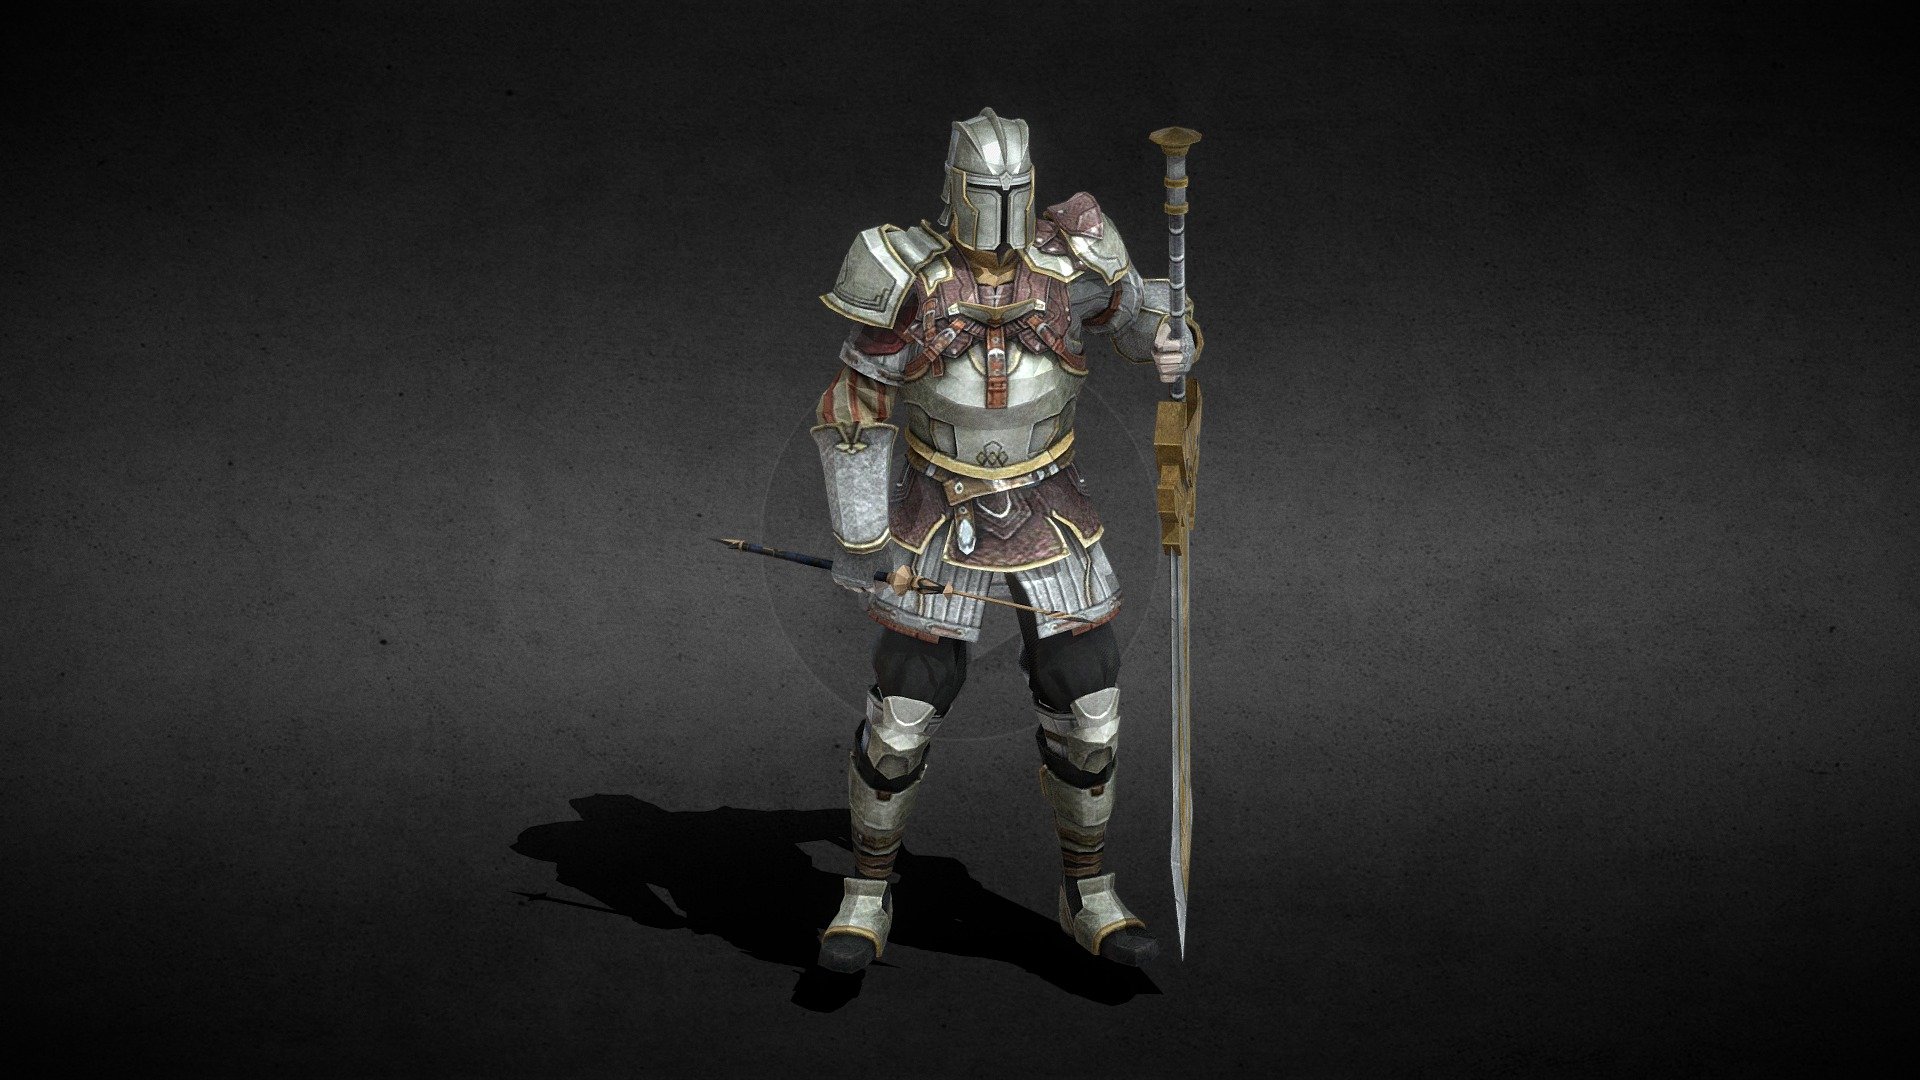 A knight based of the living legend set from shadow fight 3

It includes
-Helmet:Valor's headpiece
-Armor:Valor's might
-Greatsword:Ancestors wrath
-Pillum:Obsidian strike - Knight - Download Free 3D model by Shadow Models 3D (@shadowmodels3d) 3d model